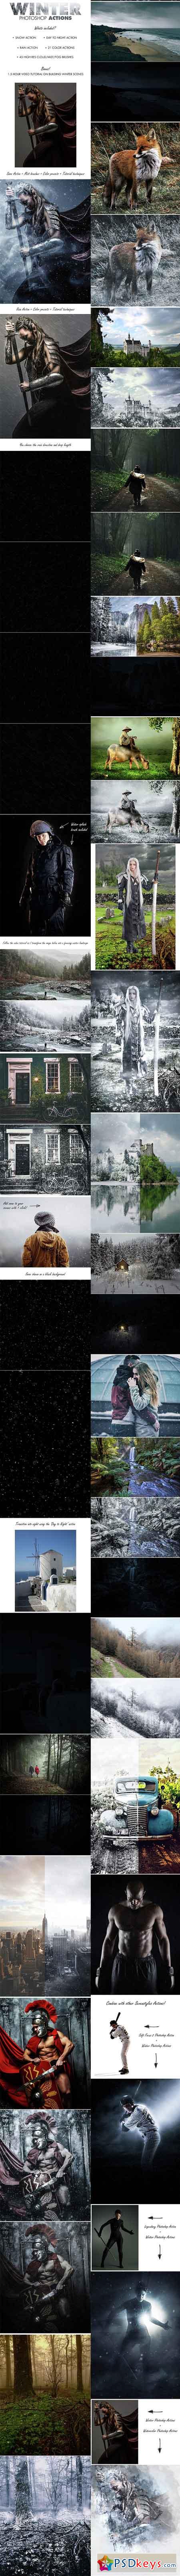 Winter Photoshop Actions 15462628